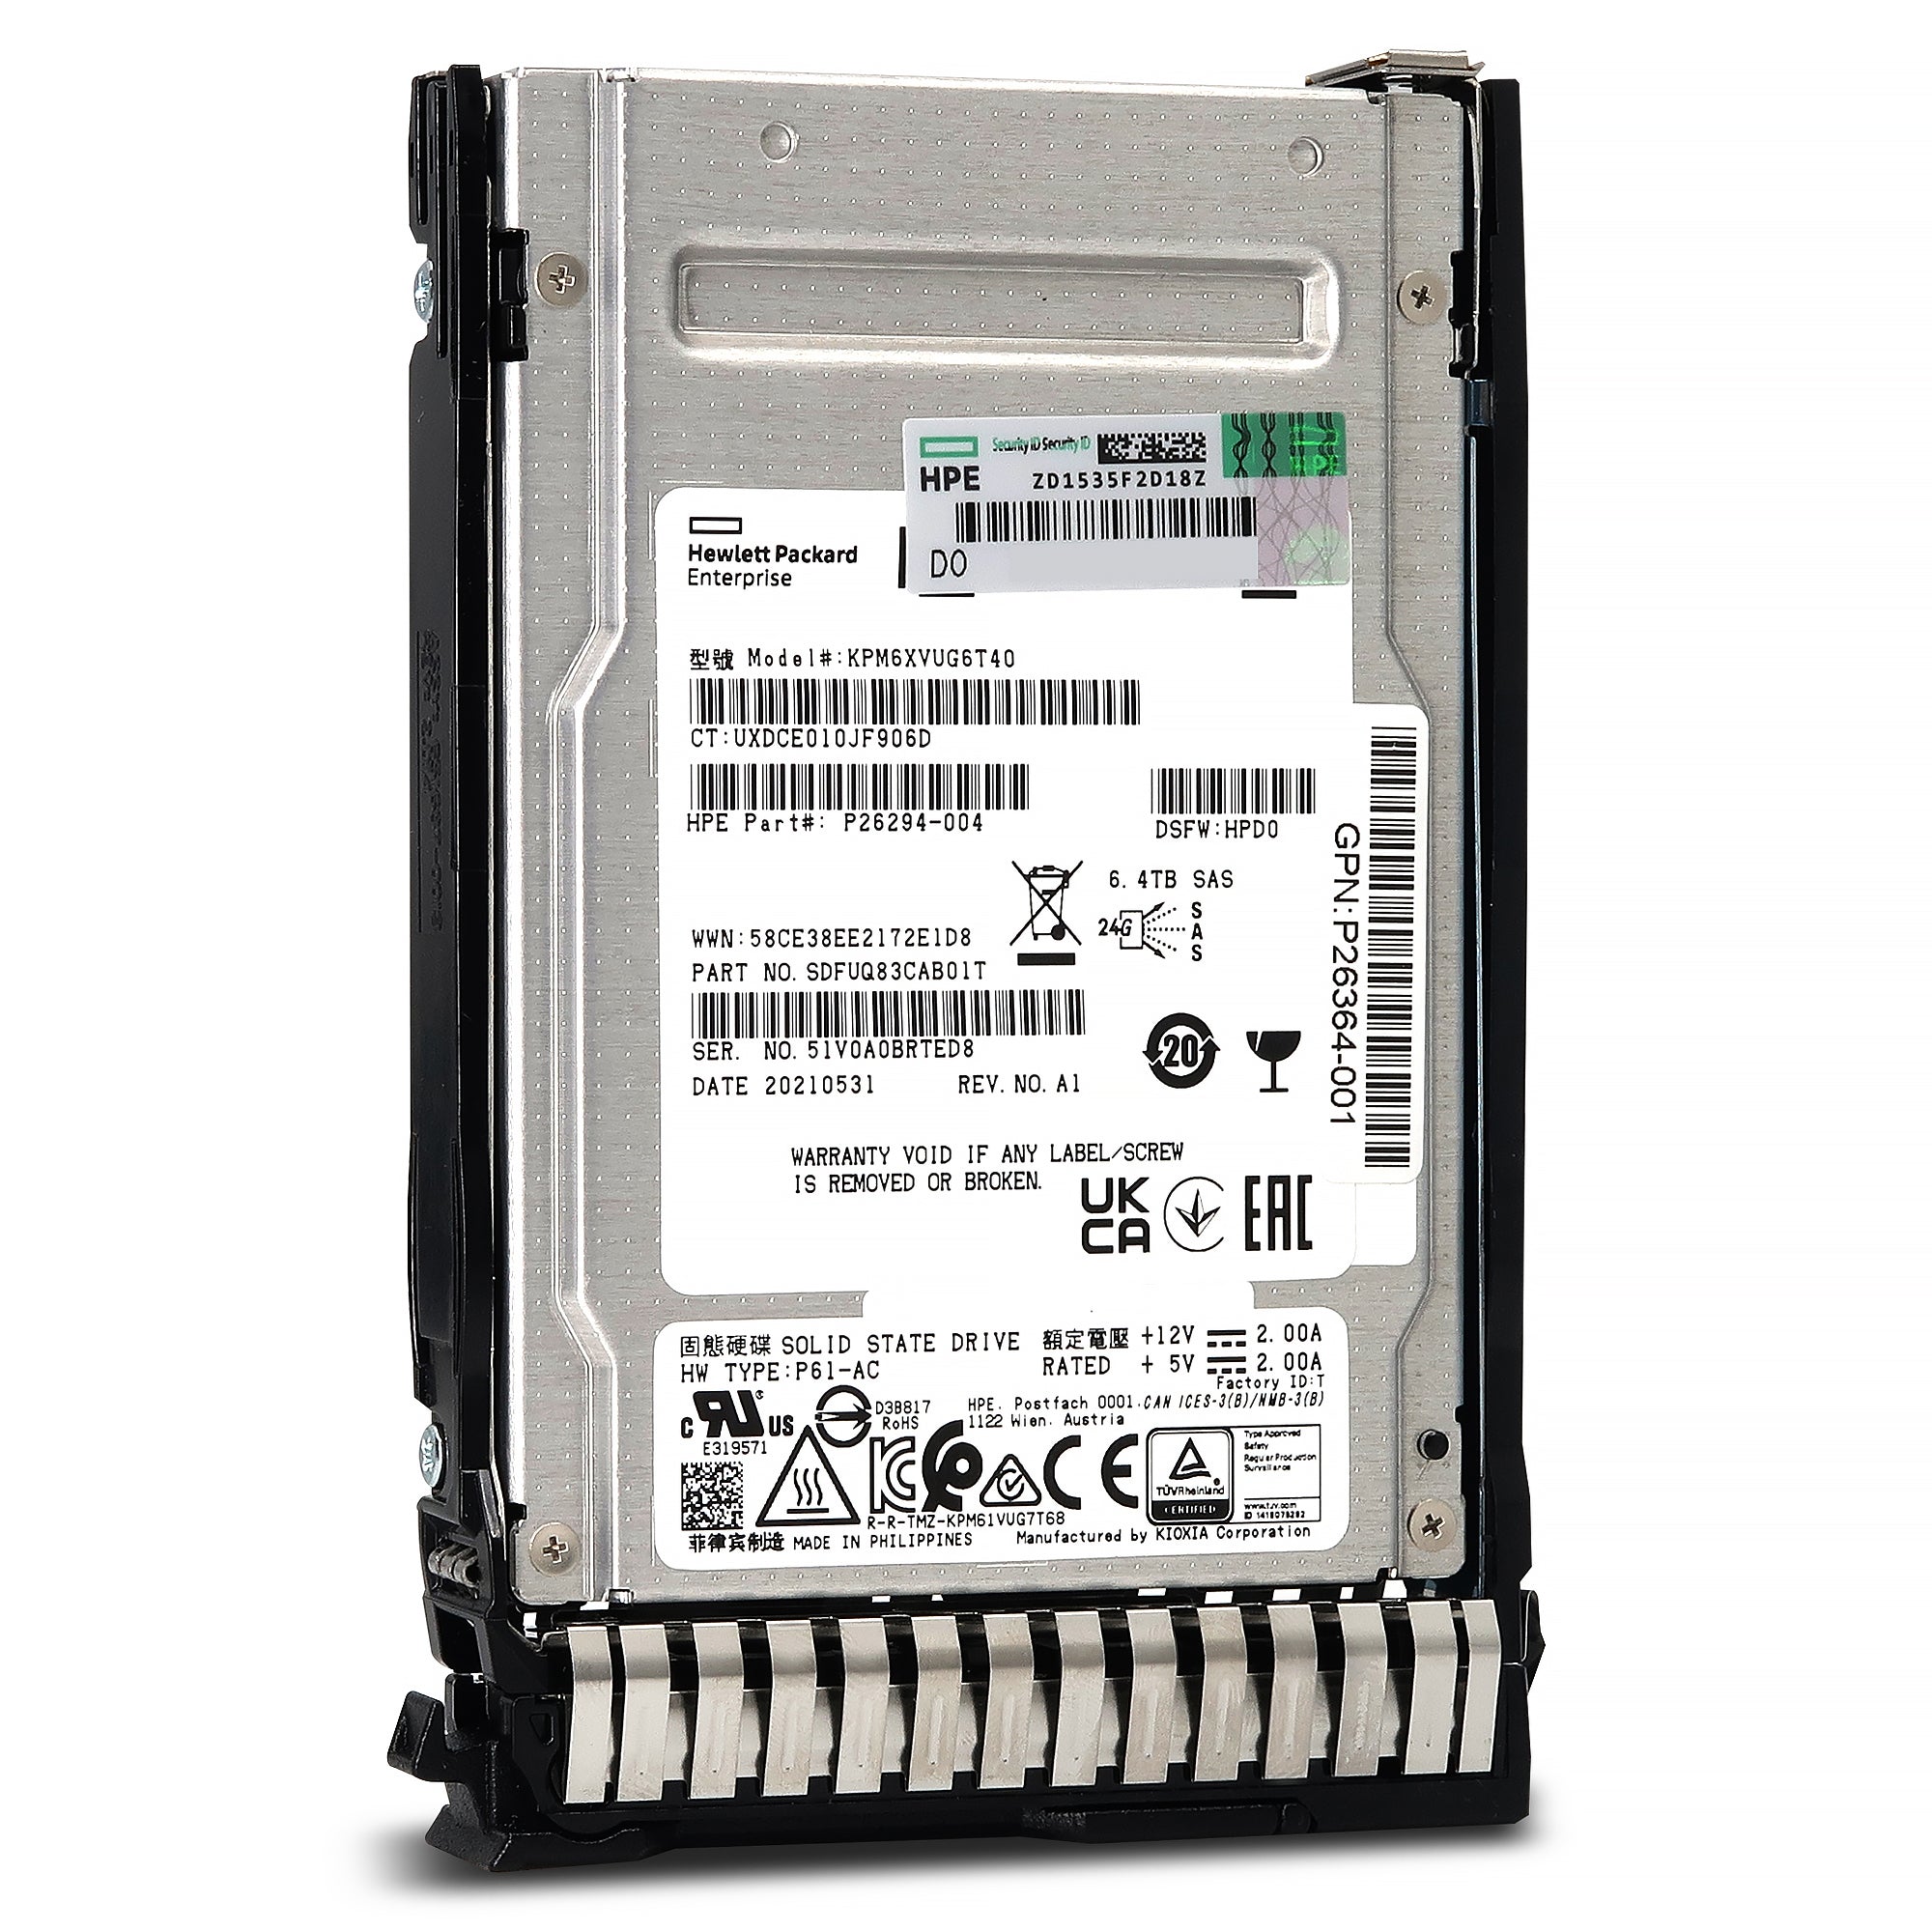 HPE PM6-V P40479-B21 KPM6XVUG6T40 6.4TB SAS 22.5Gb/s 3D TLC SIE 2.5in Solid State Drive - Front View